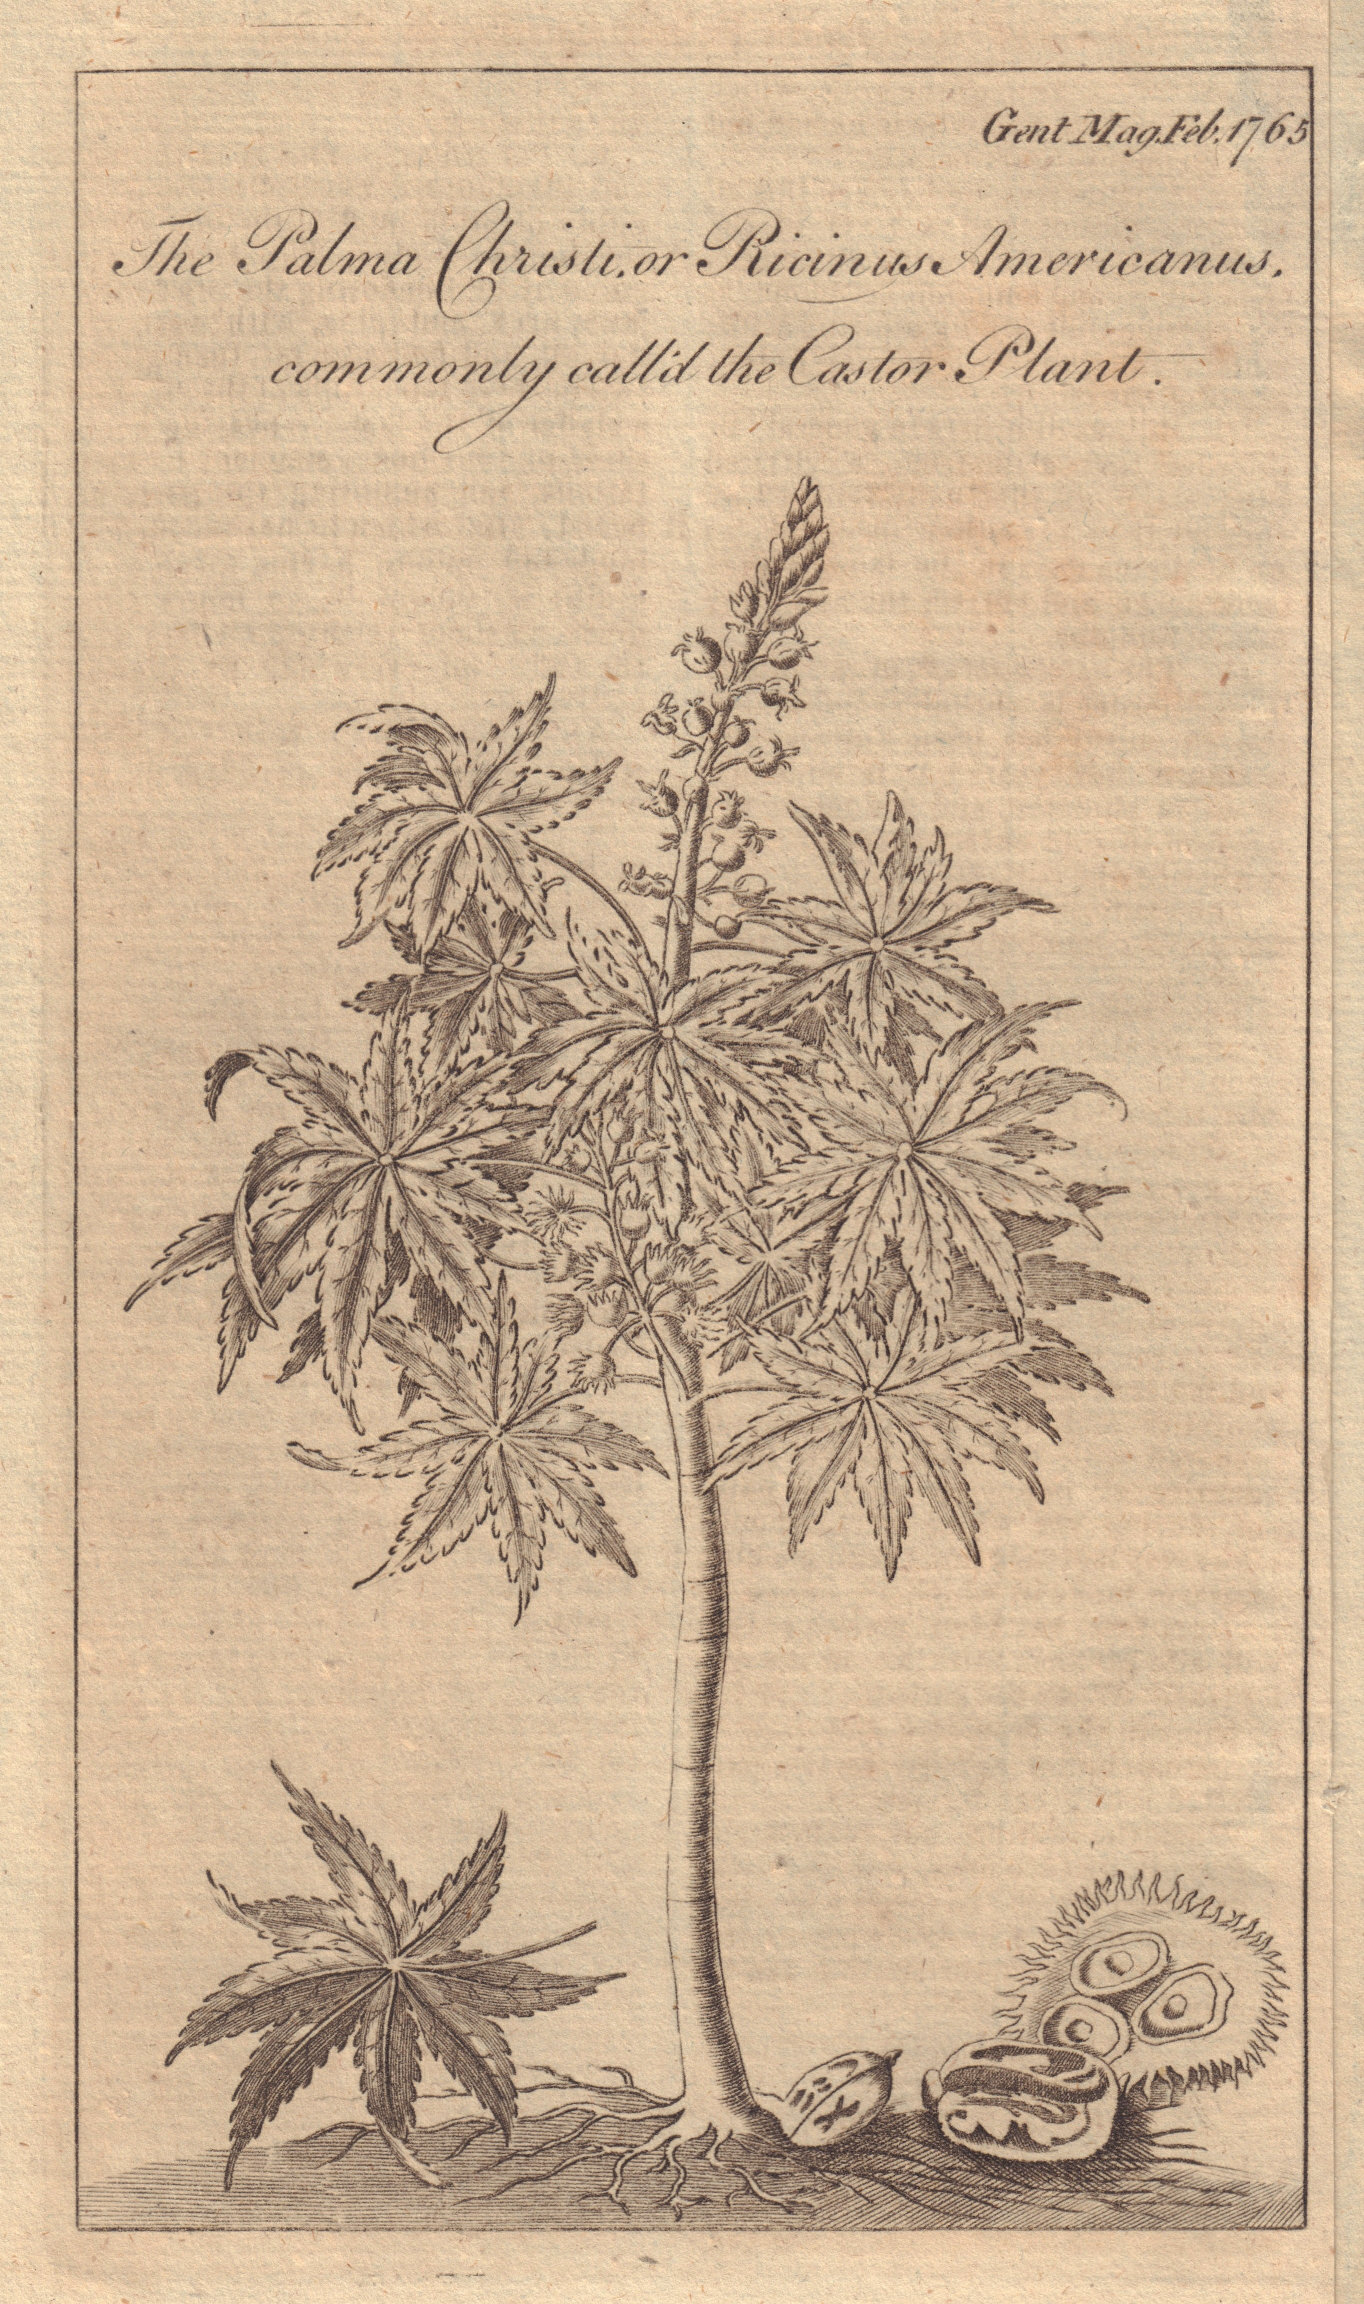 The Palma Christi or Ricinus Americanus commonly called the Castor Plant 1765